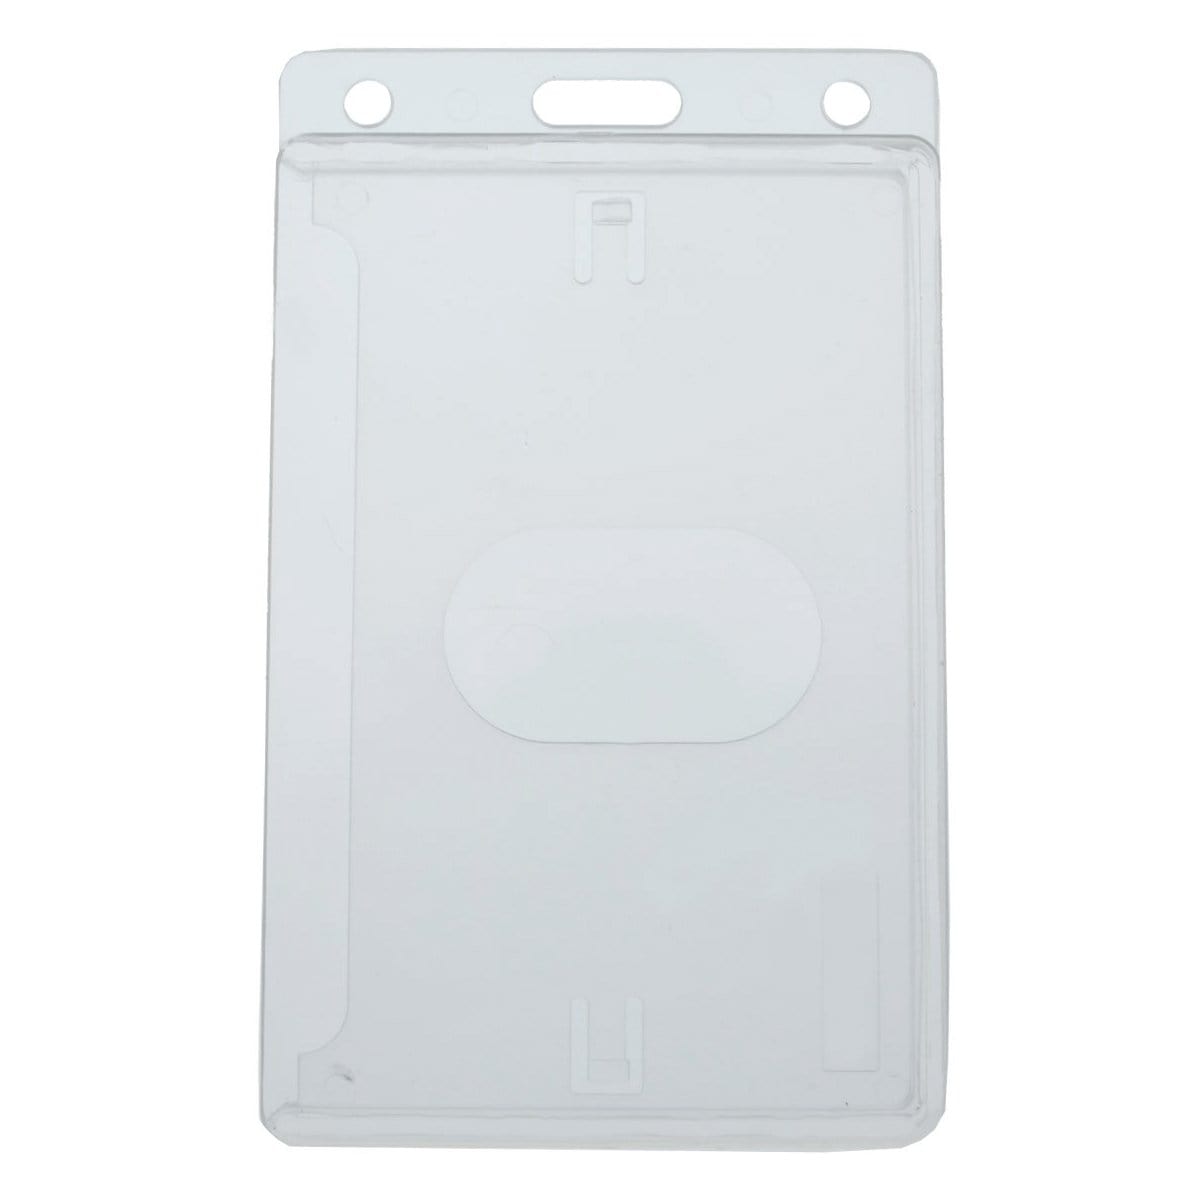 RFID Blocker ID Card Holder - Two Card Vertical - Clear HK-102 at Security  Imaging.com